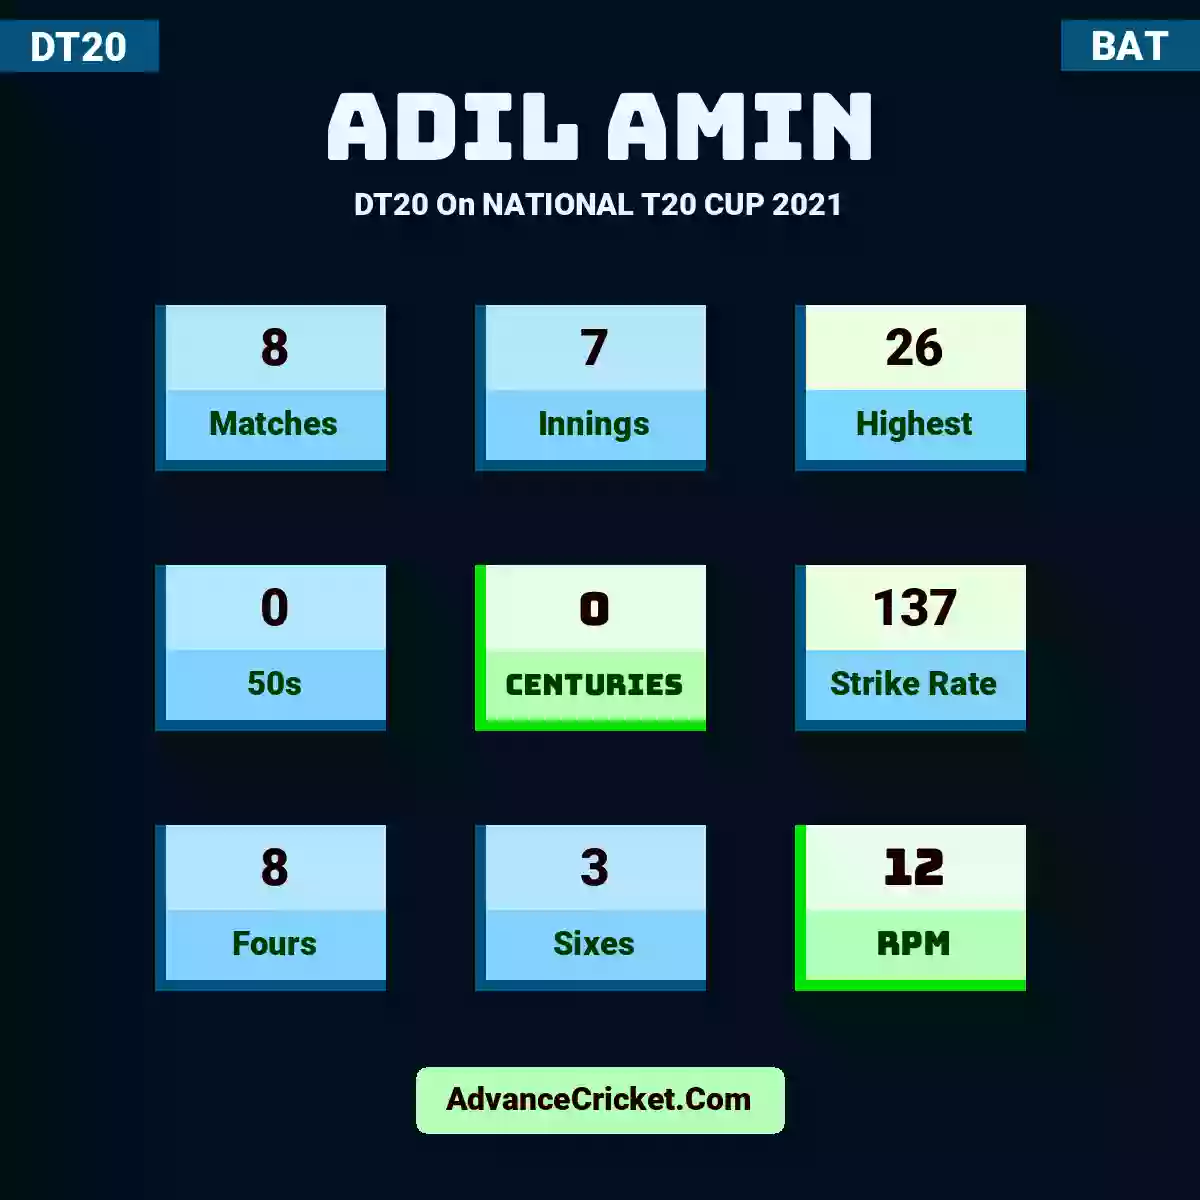 Adil Amin DT20  On NATIONAL T20 CUP 2021, Adil Amin played 8 matches, scored 26 runs as highest, 0 half-centuries, and 0 centuries, with a strike rate of 137. A.Amin hit 8 fours and 3 sixes, with an RPM of 12.